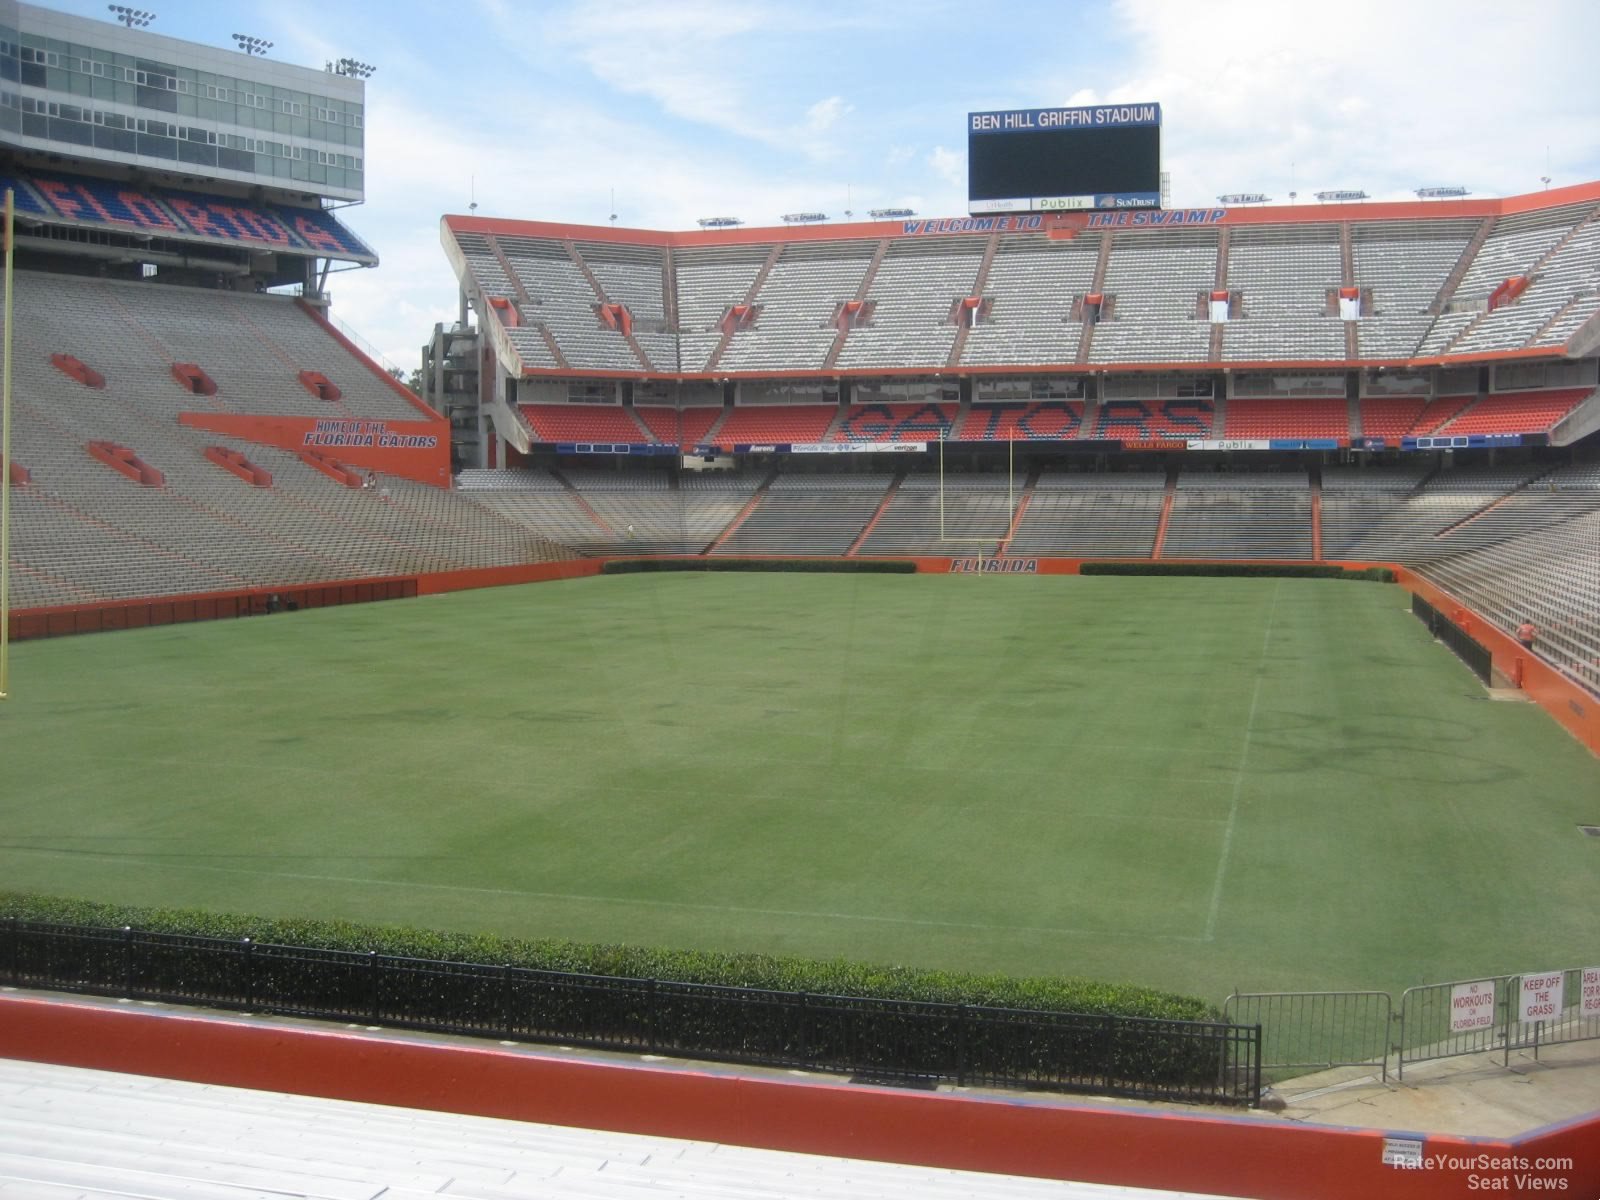 section c, row 23 seat view  - ben hill griffin stadium